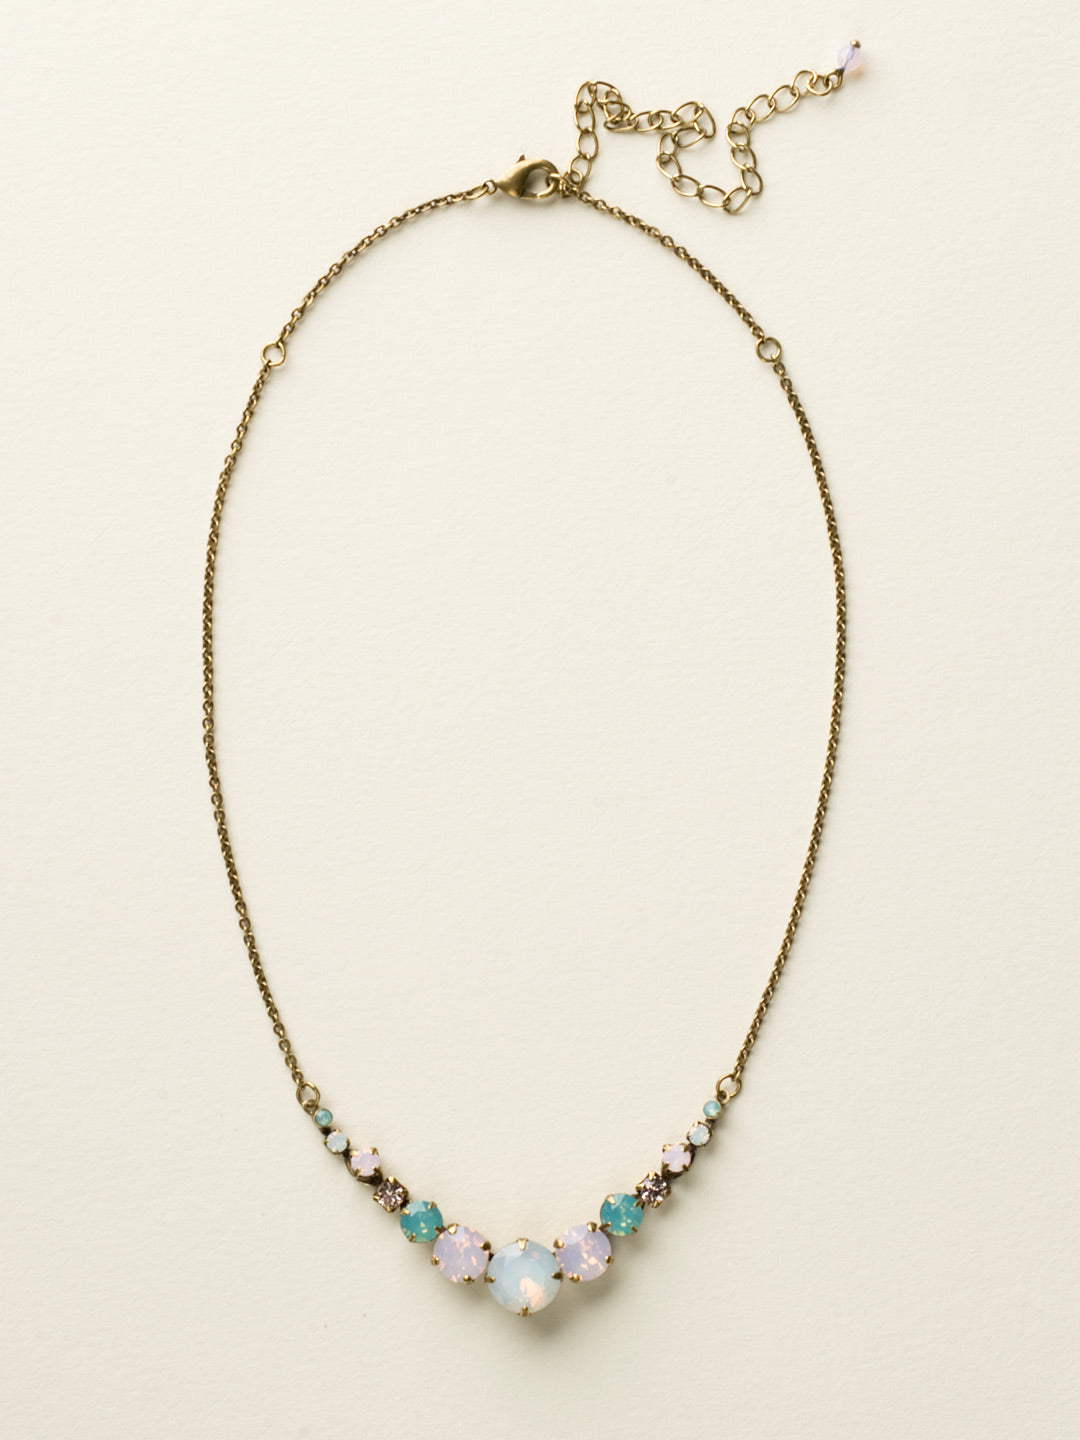 London Tennis Necklace - NCQ14AGROW - A long, simple chain paired with gorgeous round stones is exactly what every girl needs to dress things up. This round stone necklace is perfect for layering, or to just wear alone. Let the simple sparkle take over. From Sorrelli's Rose Water collection in our Antique Gold-tone finish.